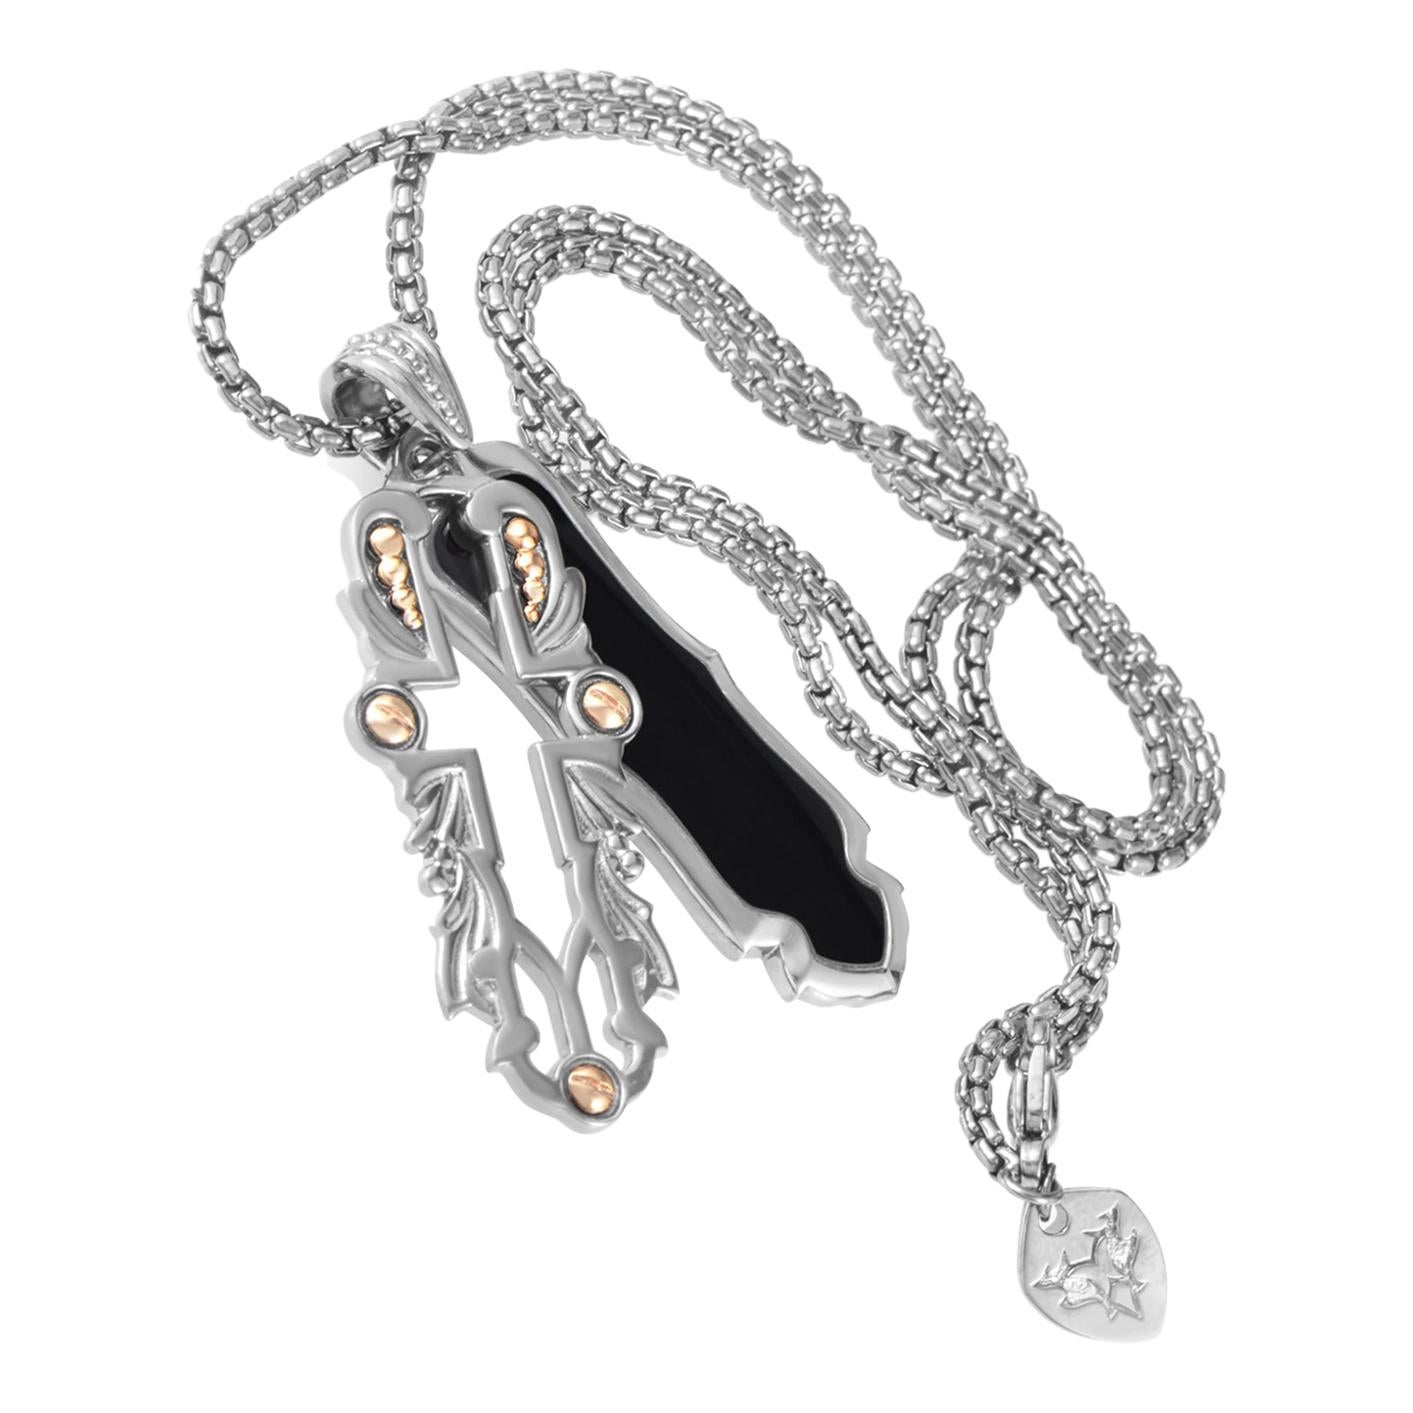 Stephen Webster London Calling Sterling Silver Onyx Pendant Necklace